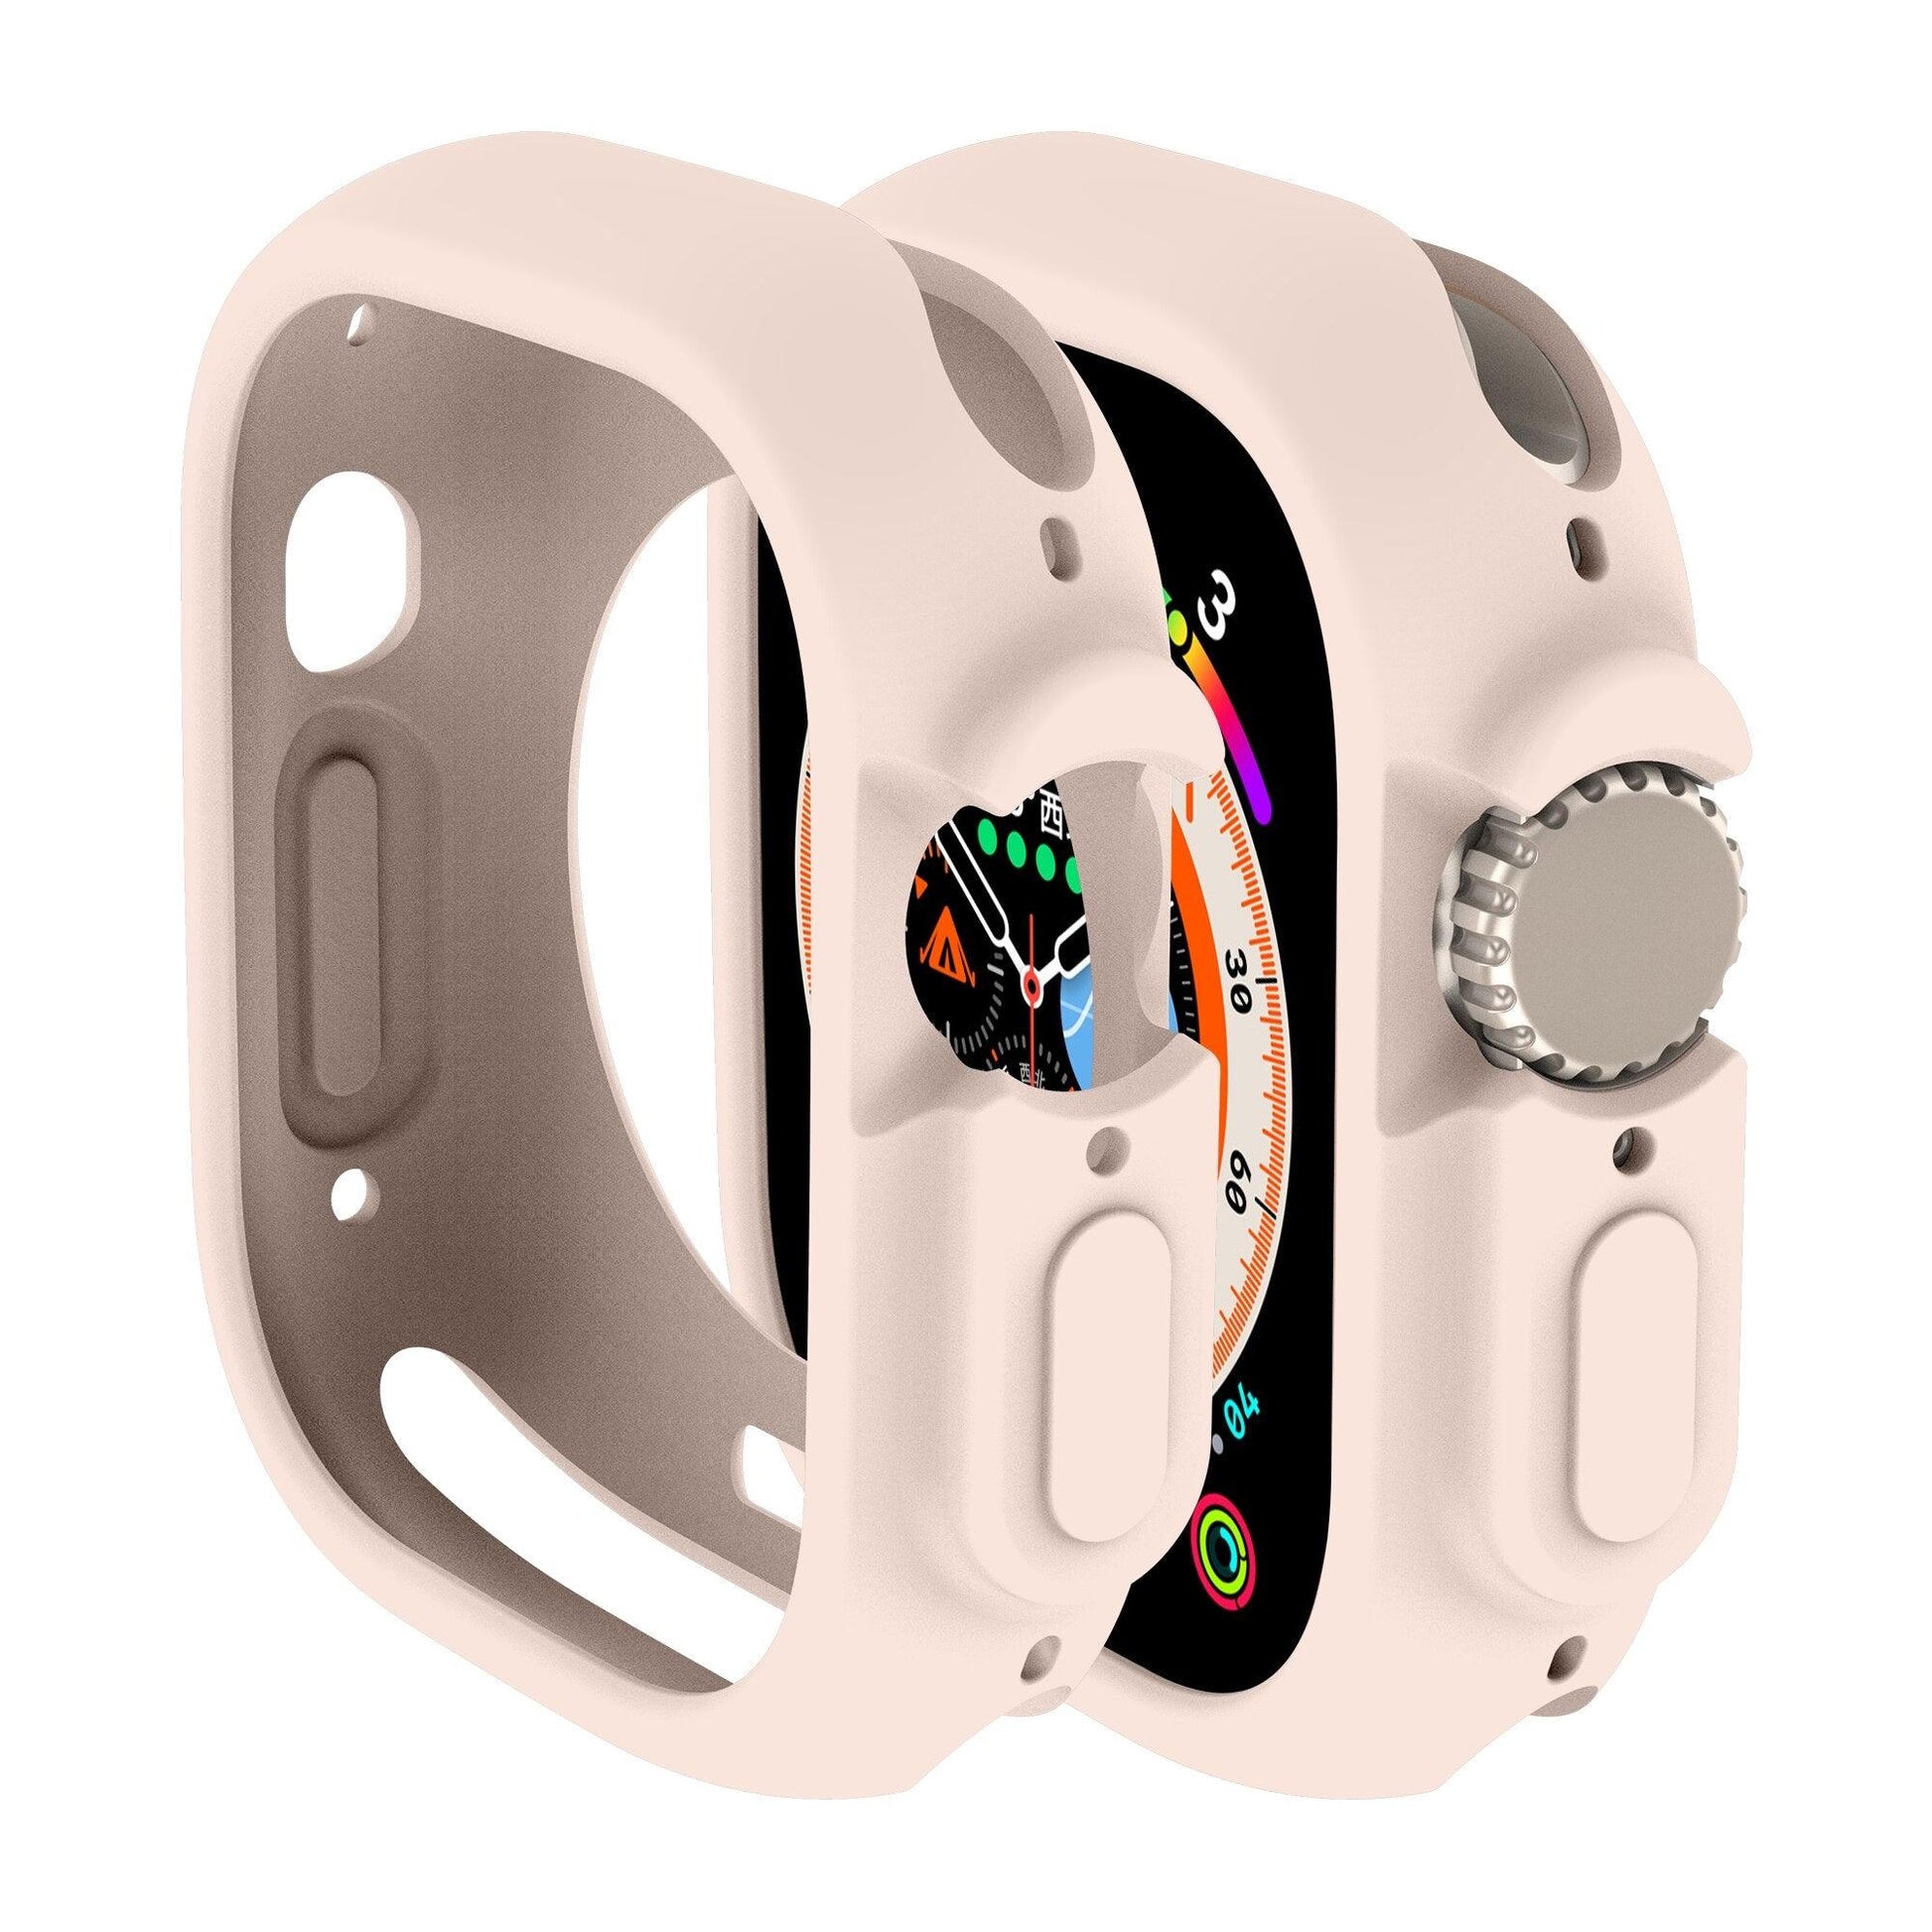 Apple Watch Series 7 Case 41mm Rubber Style - Dealy